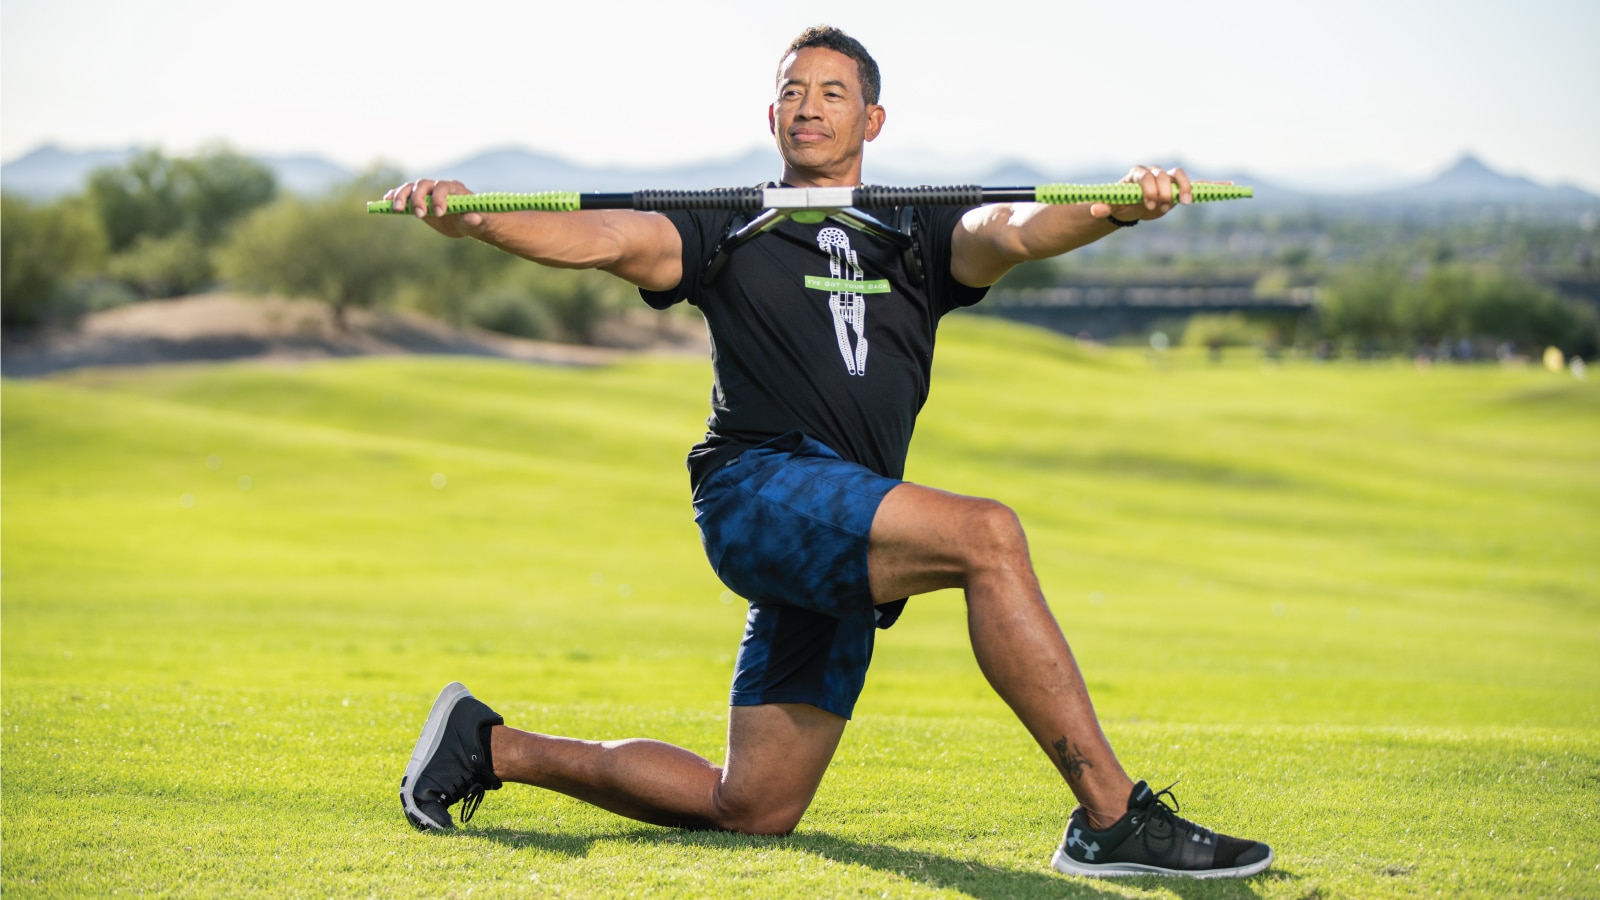 TrueTurnPro is a new way of rotational training.